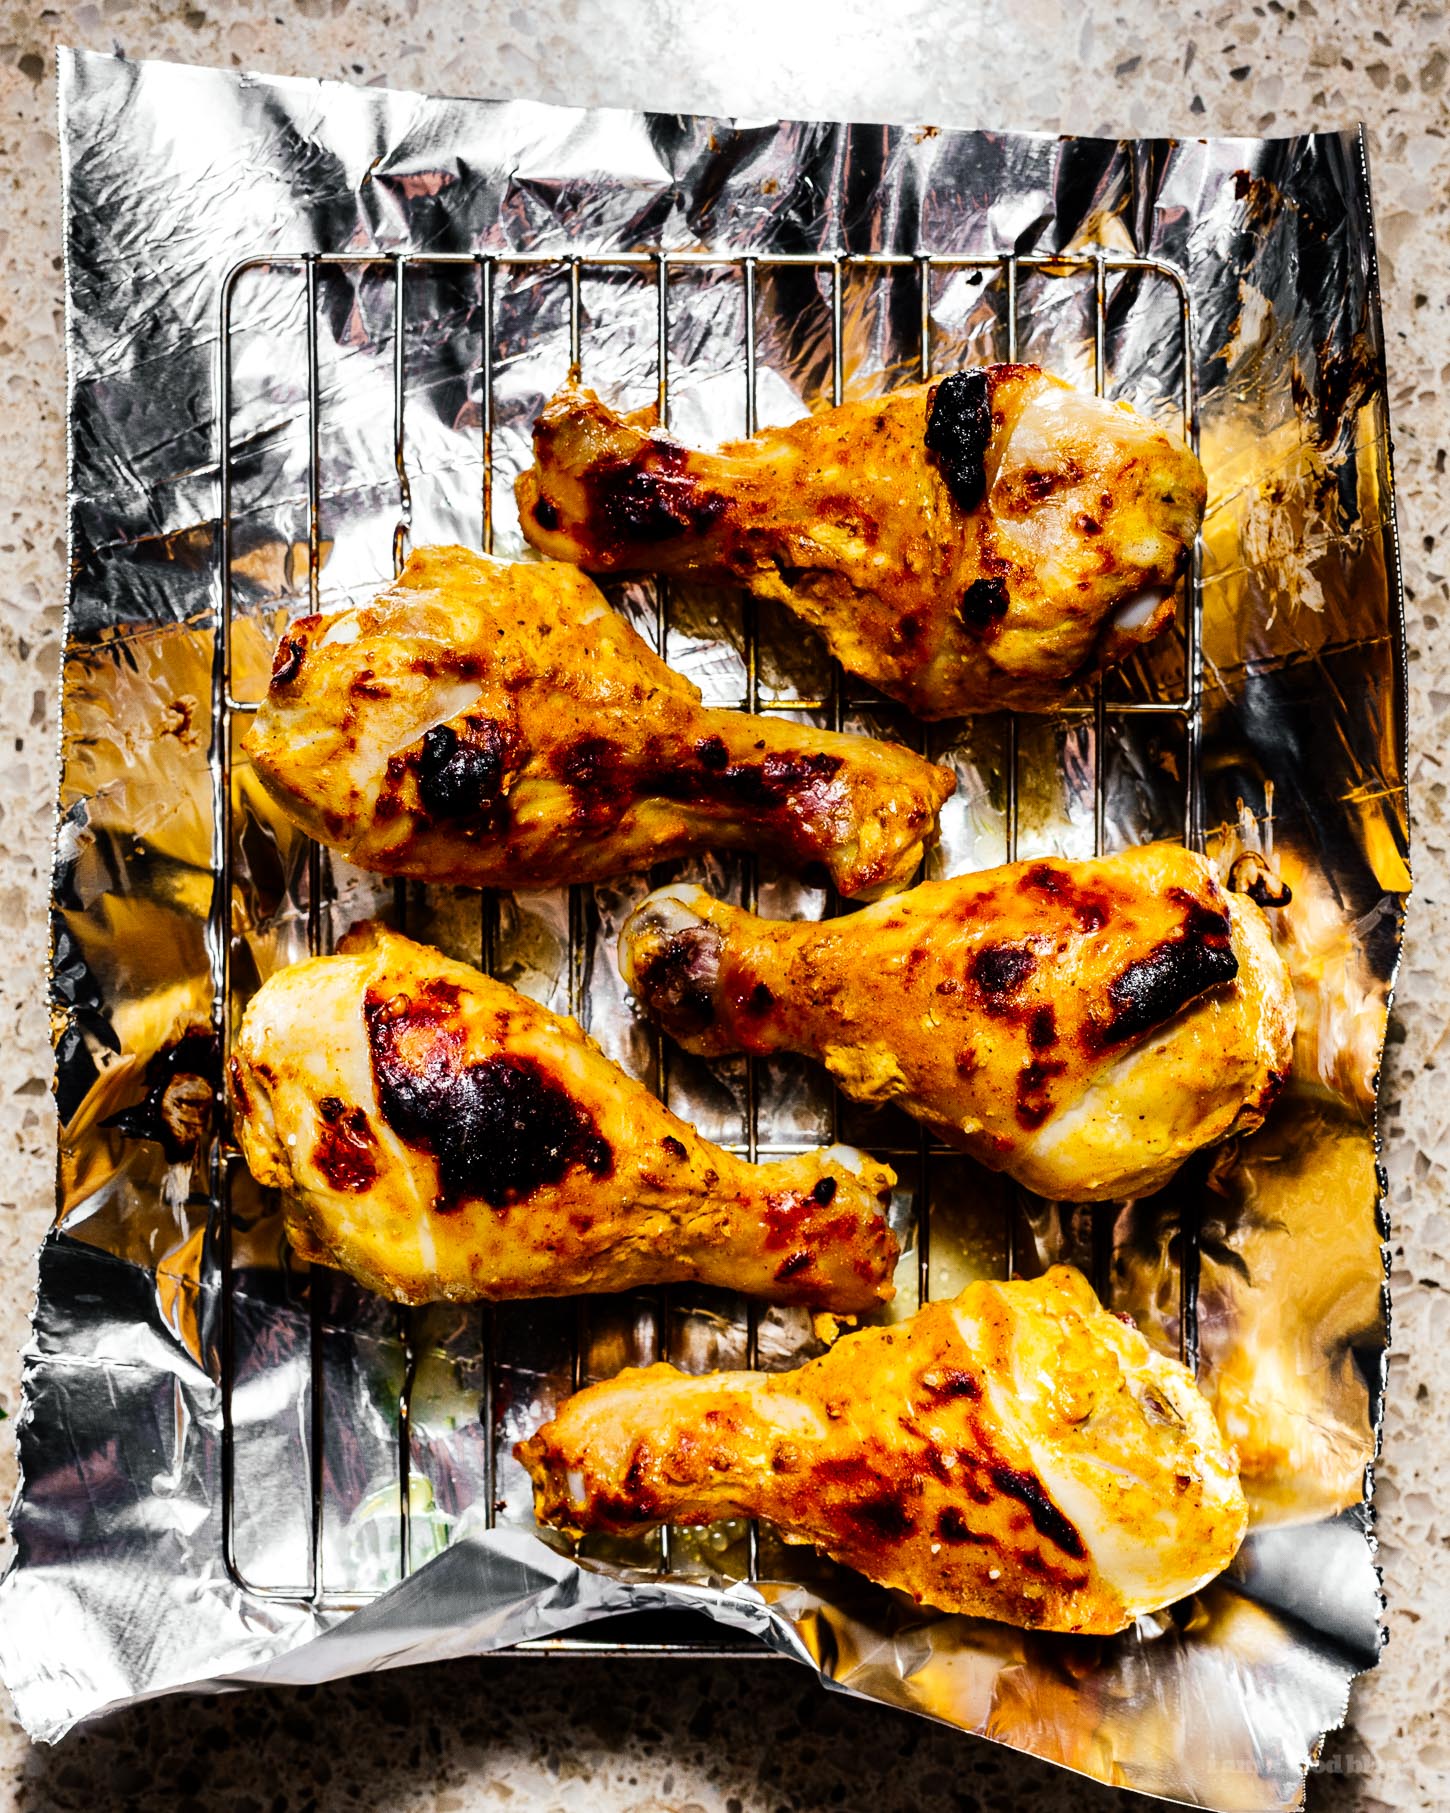 The Easiest 8 Ingredient Oven Broiled Tandoori Chicken Recipe | www.iamafoodblog.com